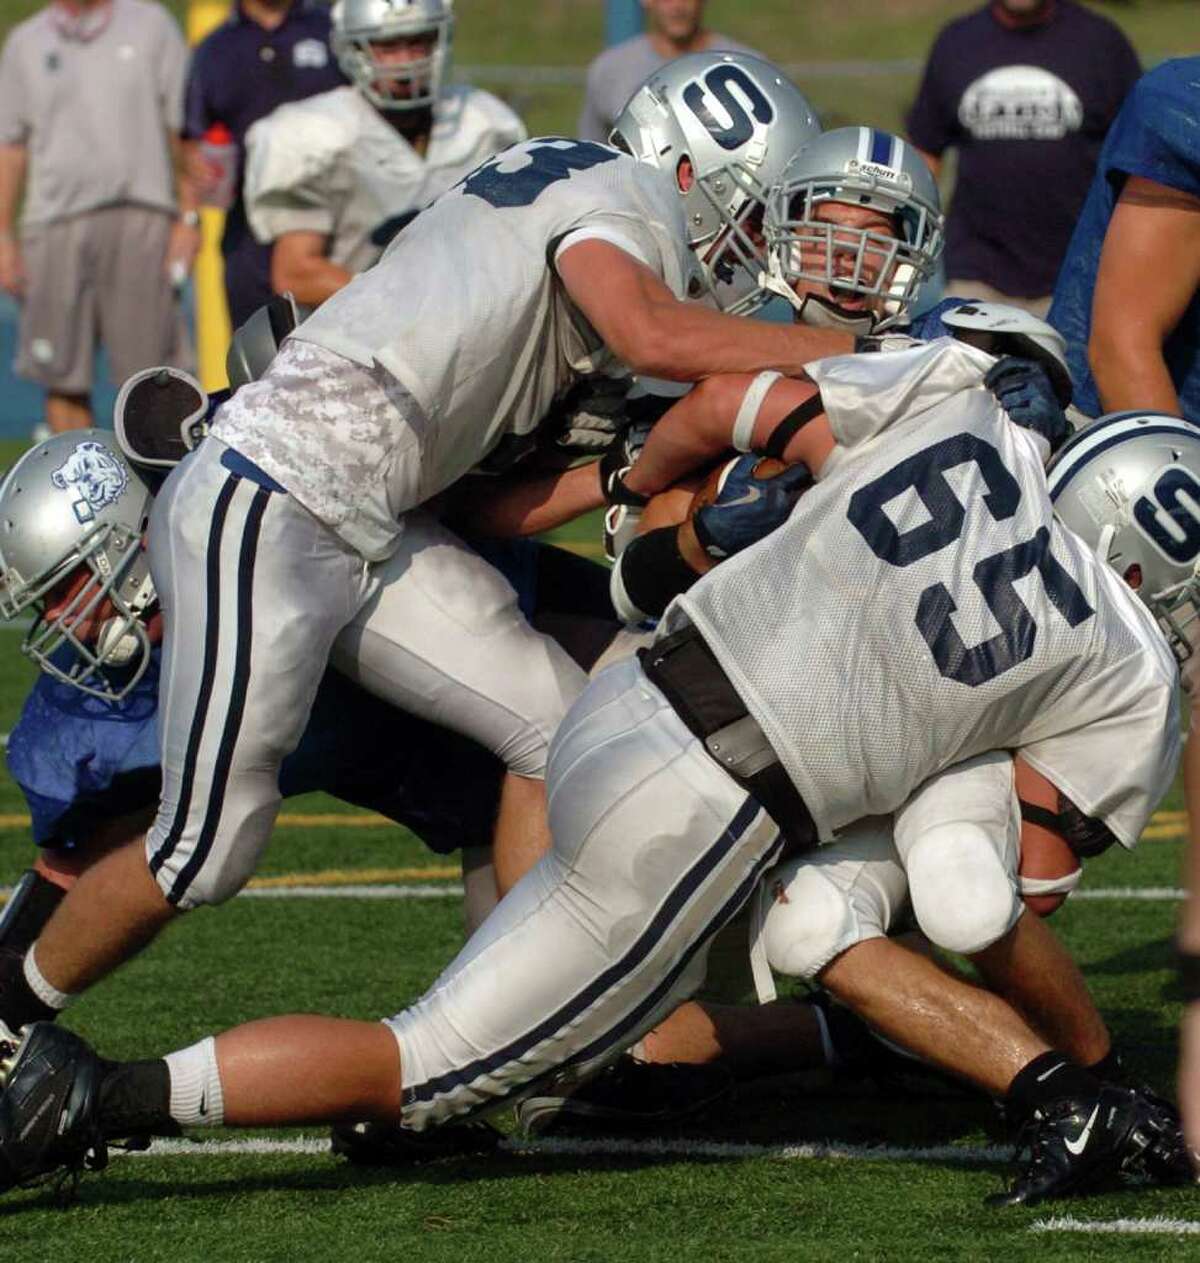 Staples' #65 Mike Nicholaus, in front, and #83 Chris Coyne, left, take down Bunnell's Josh Diaz, during football scrimage action in Stratford, Conn. on Wednesday September 1, 2010.